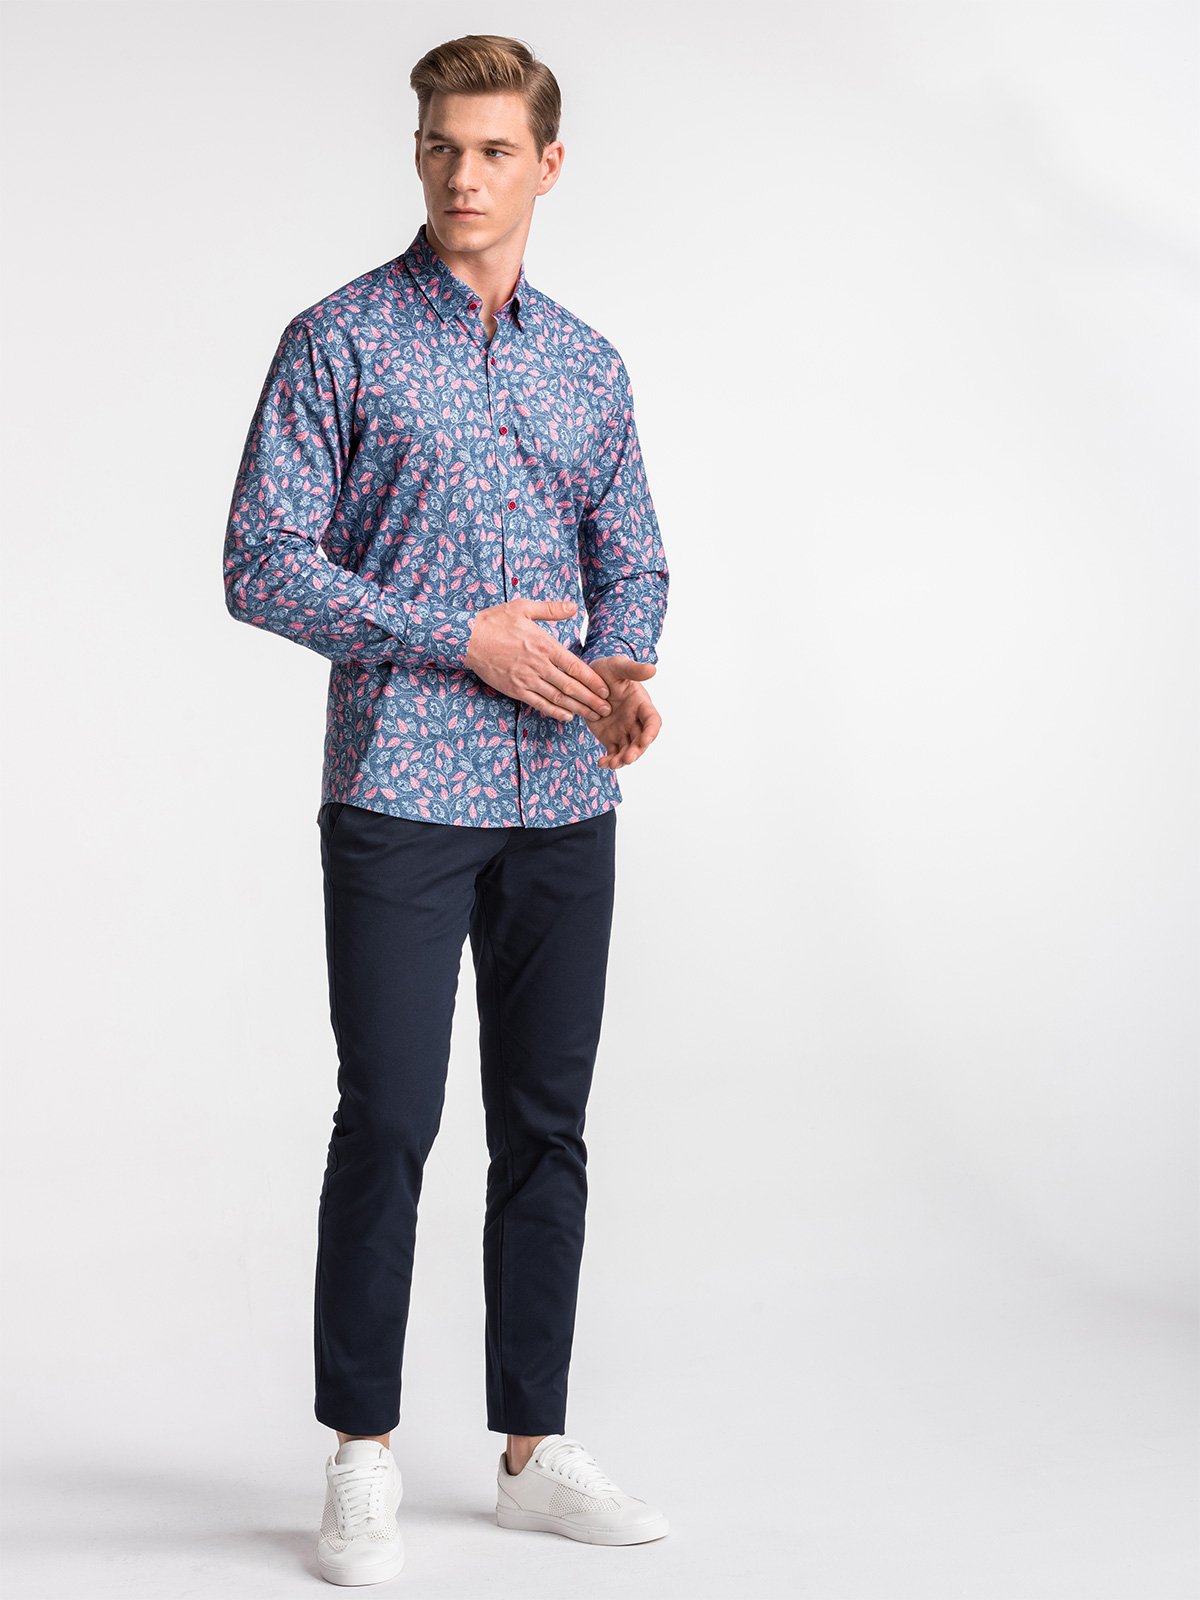 Men's shirt with long sleeves K500 - navy/pink | MODONE wholesale ...